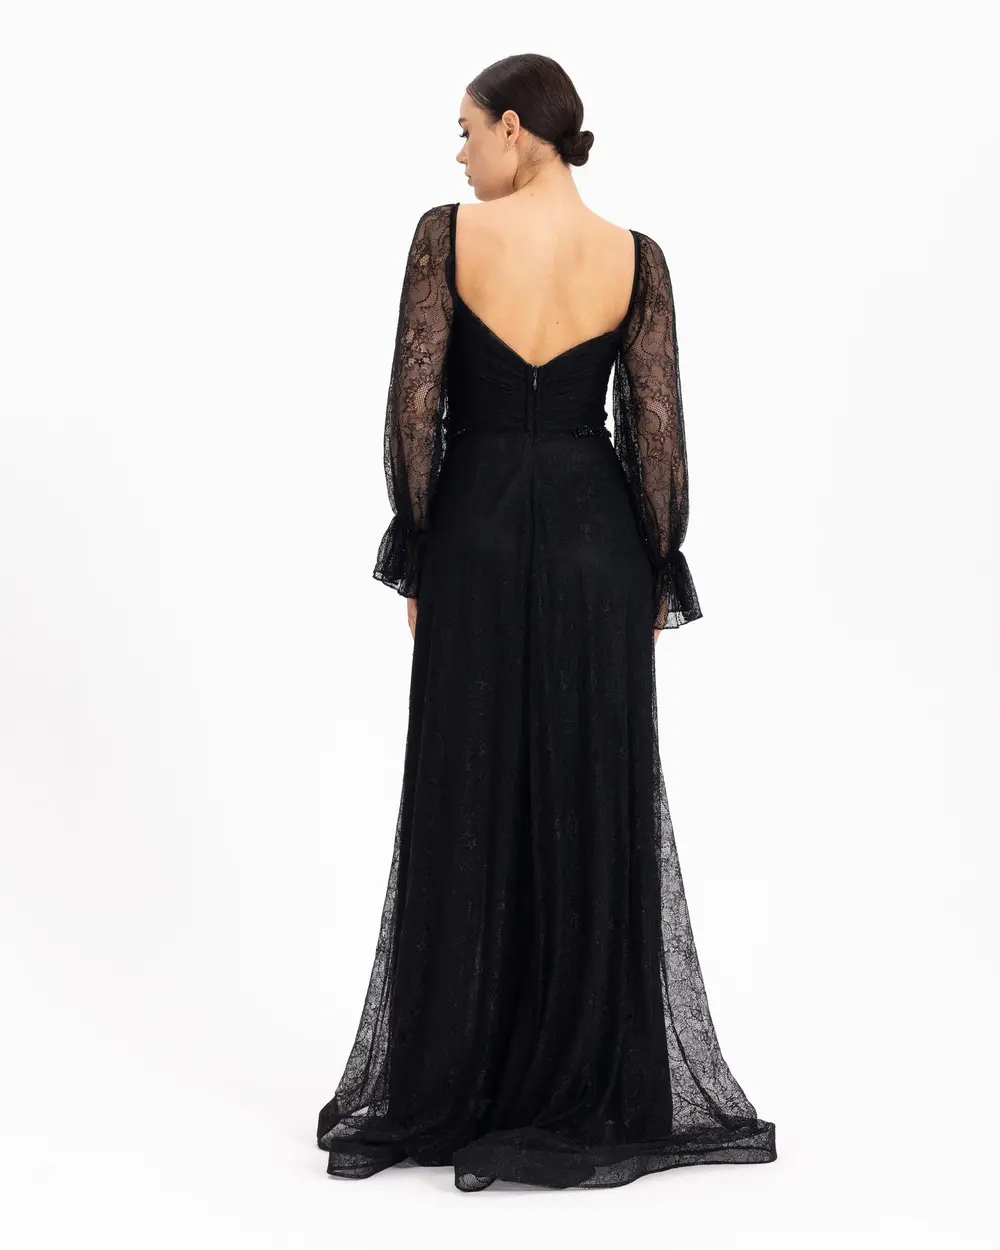 BEAD EMBROIDERED EVENING DRESS